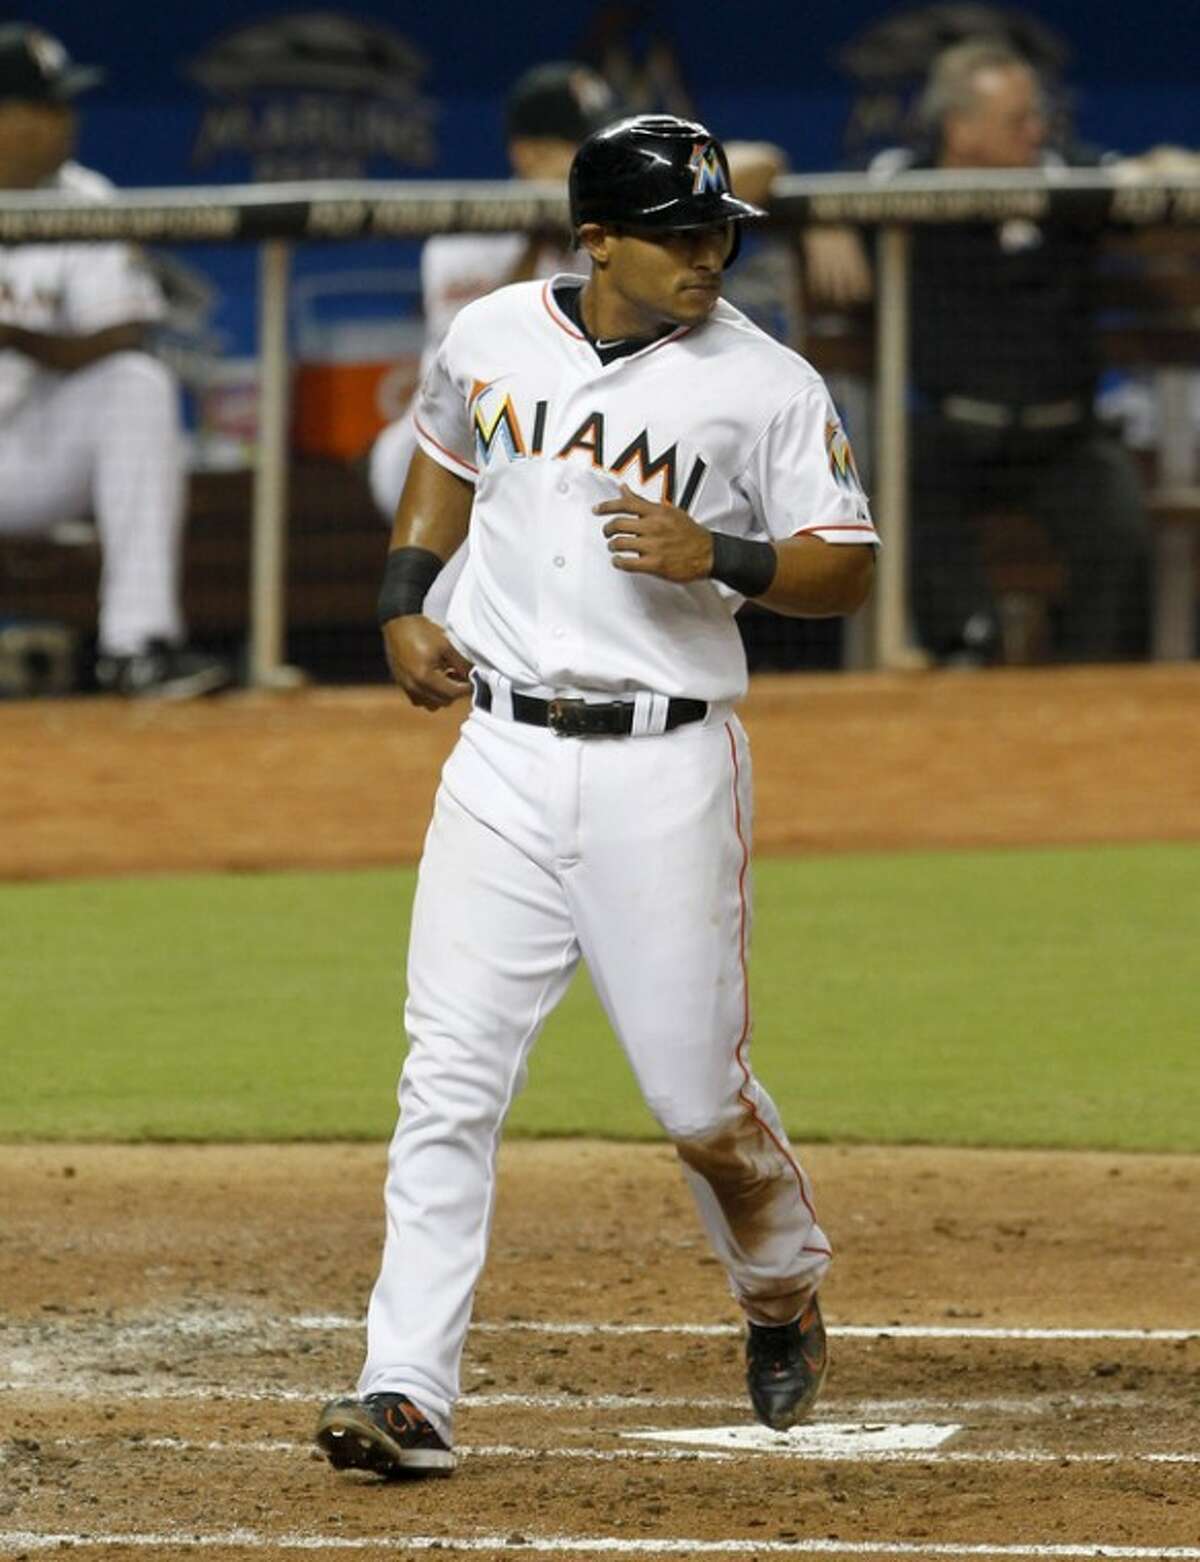 Miami Marlins' Donovan Solano scores on a double by Bryan Petersen in the third inning of a baseball game against the New York Mets in Miami, Saturday, Sept. 1, 2012. (AP Photo/Alan Diaz)